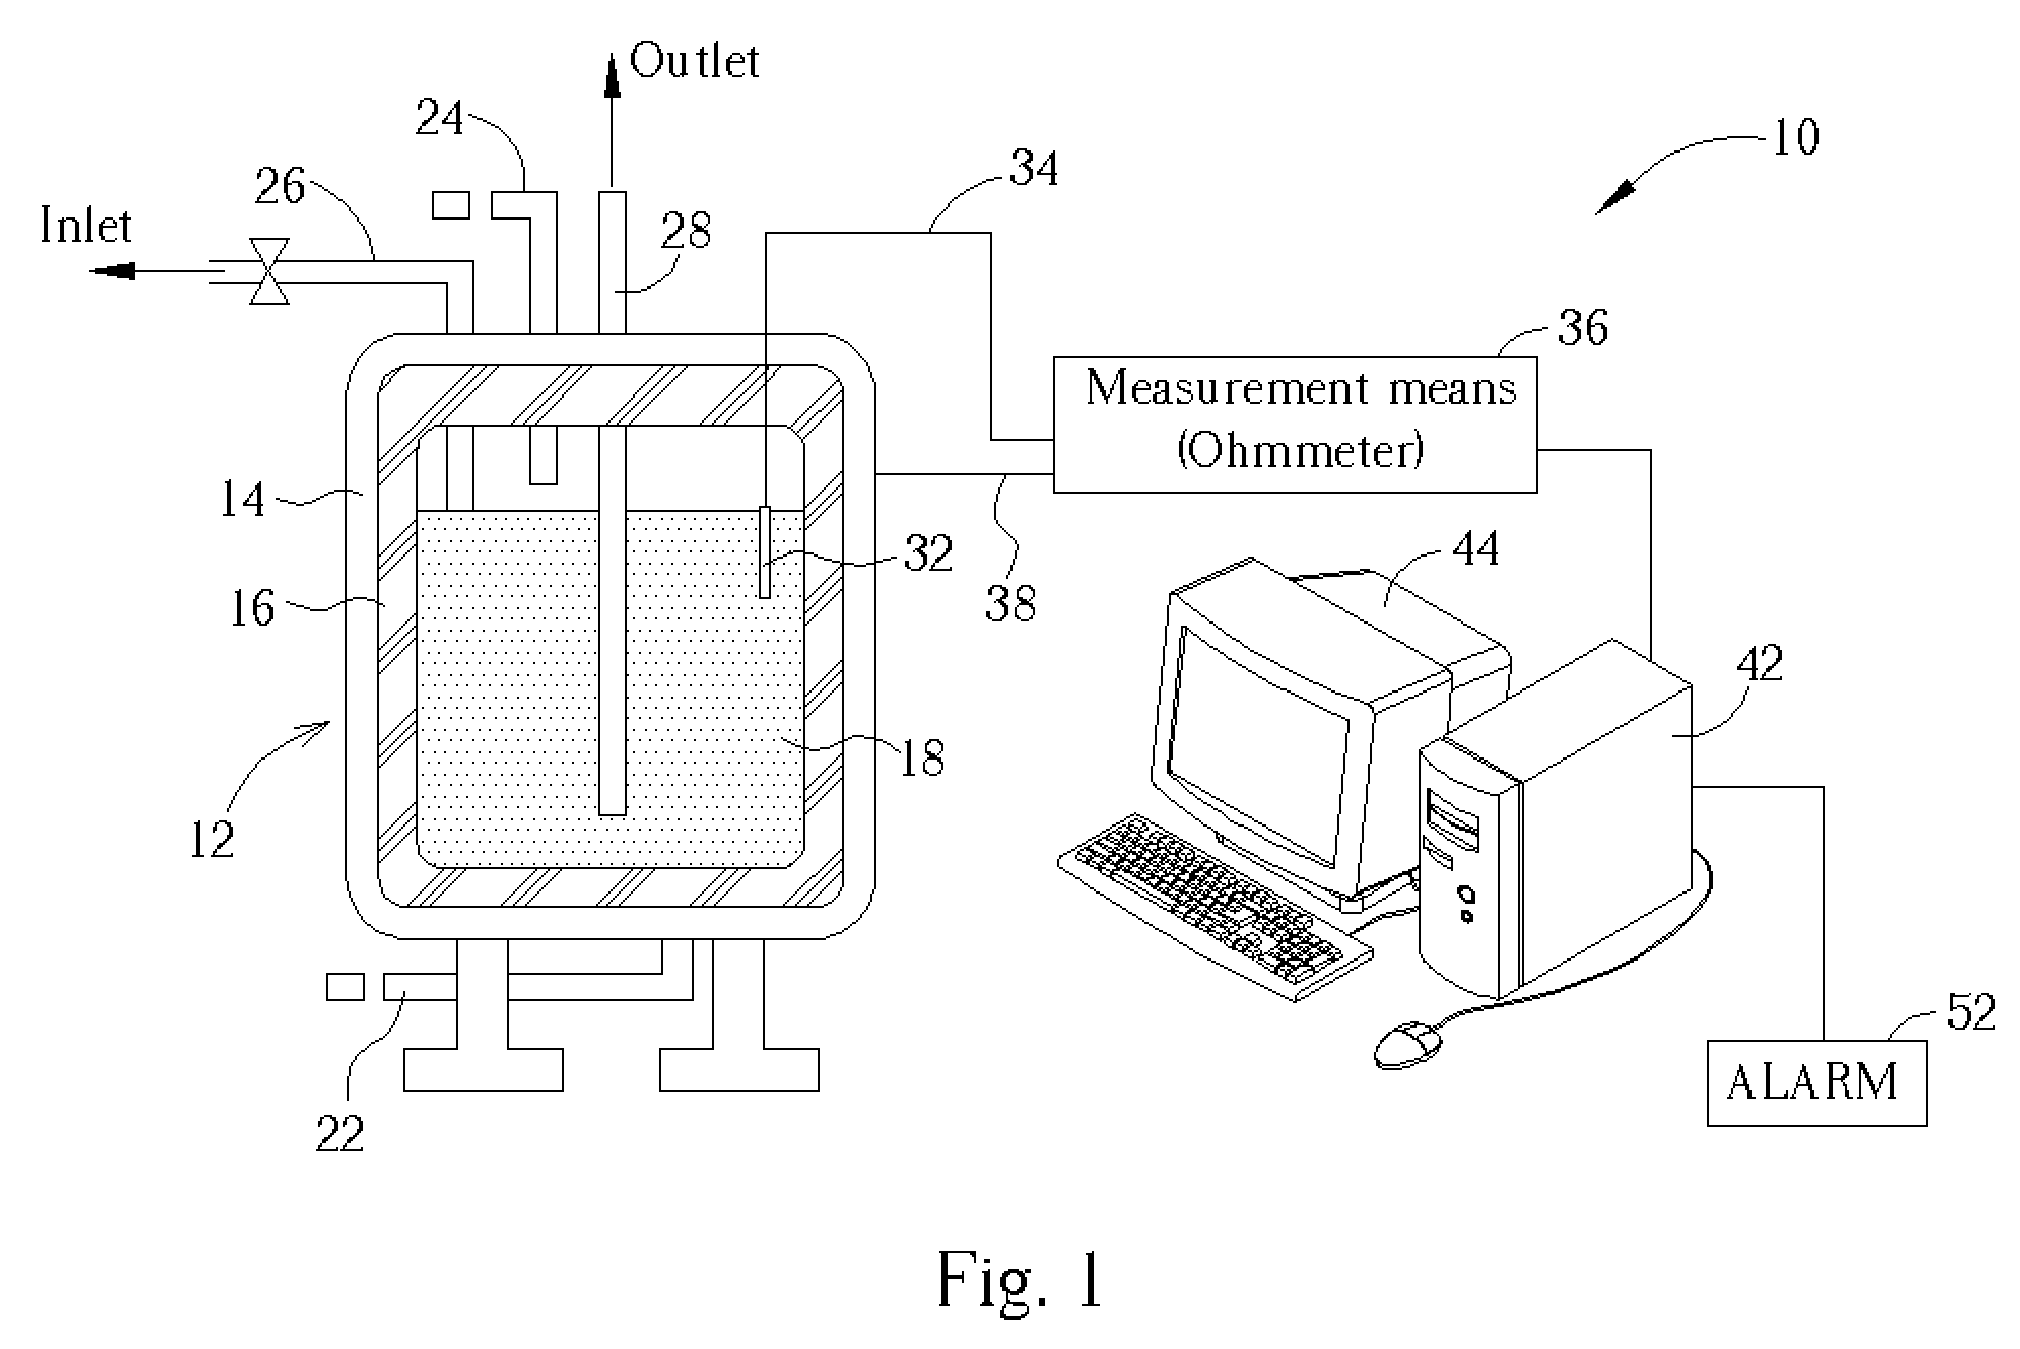 In-situ monitoring and controlling system for chemical vessels or tanks